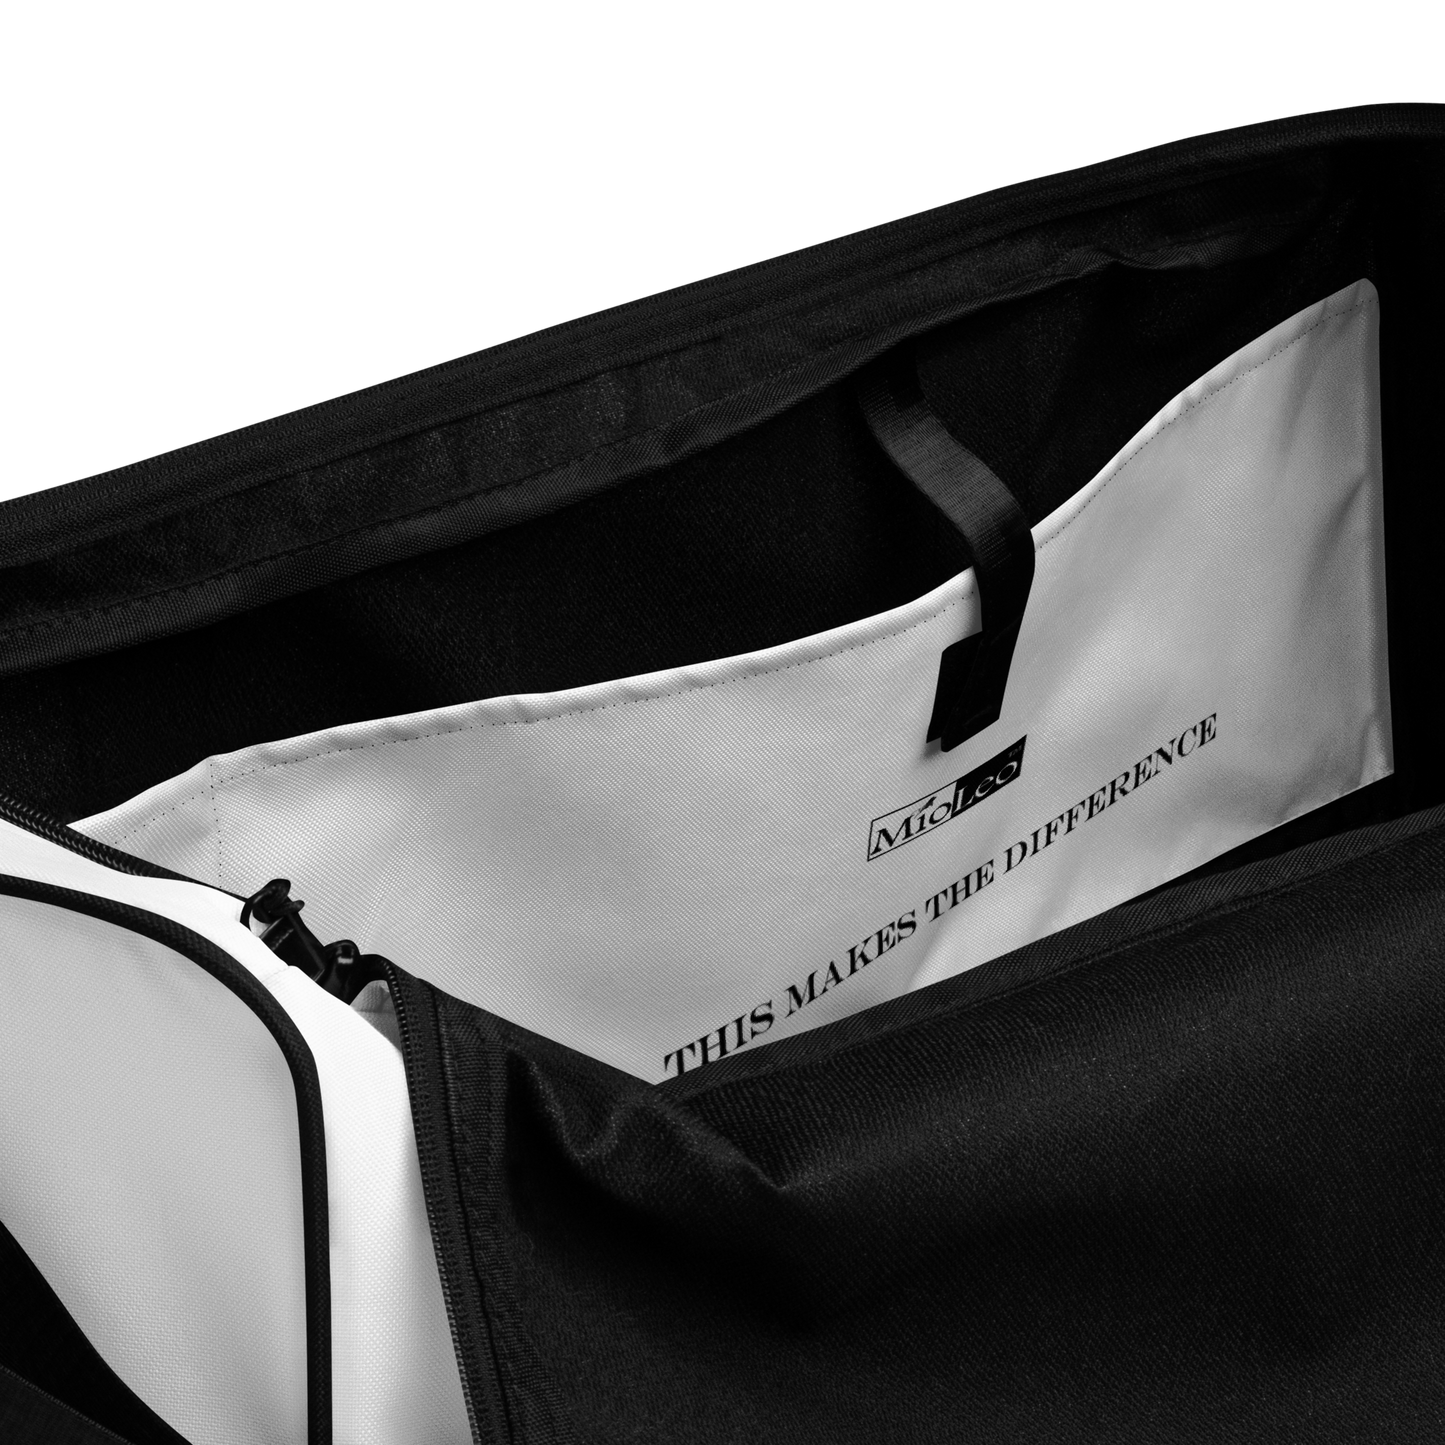 Duffle-Bag White-Line No.802 "unlimited" by MioLeo